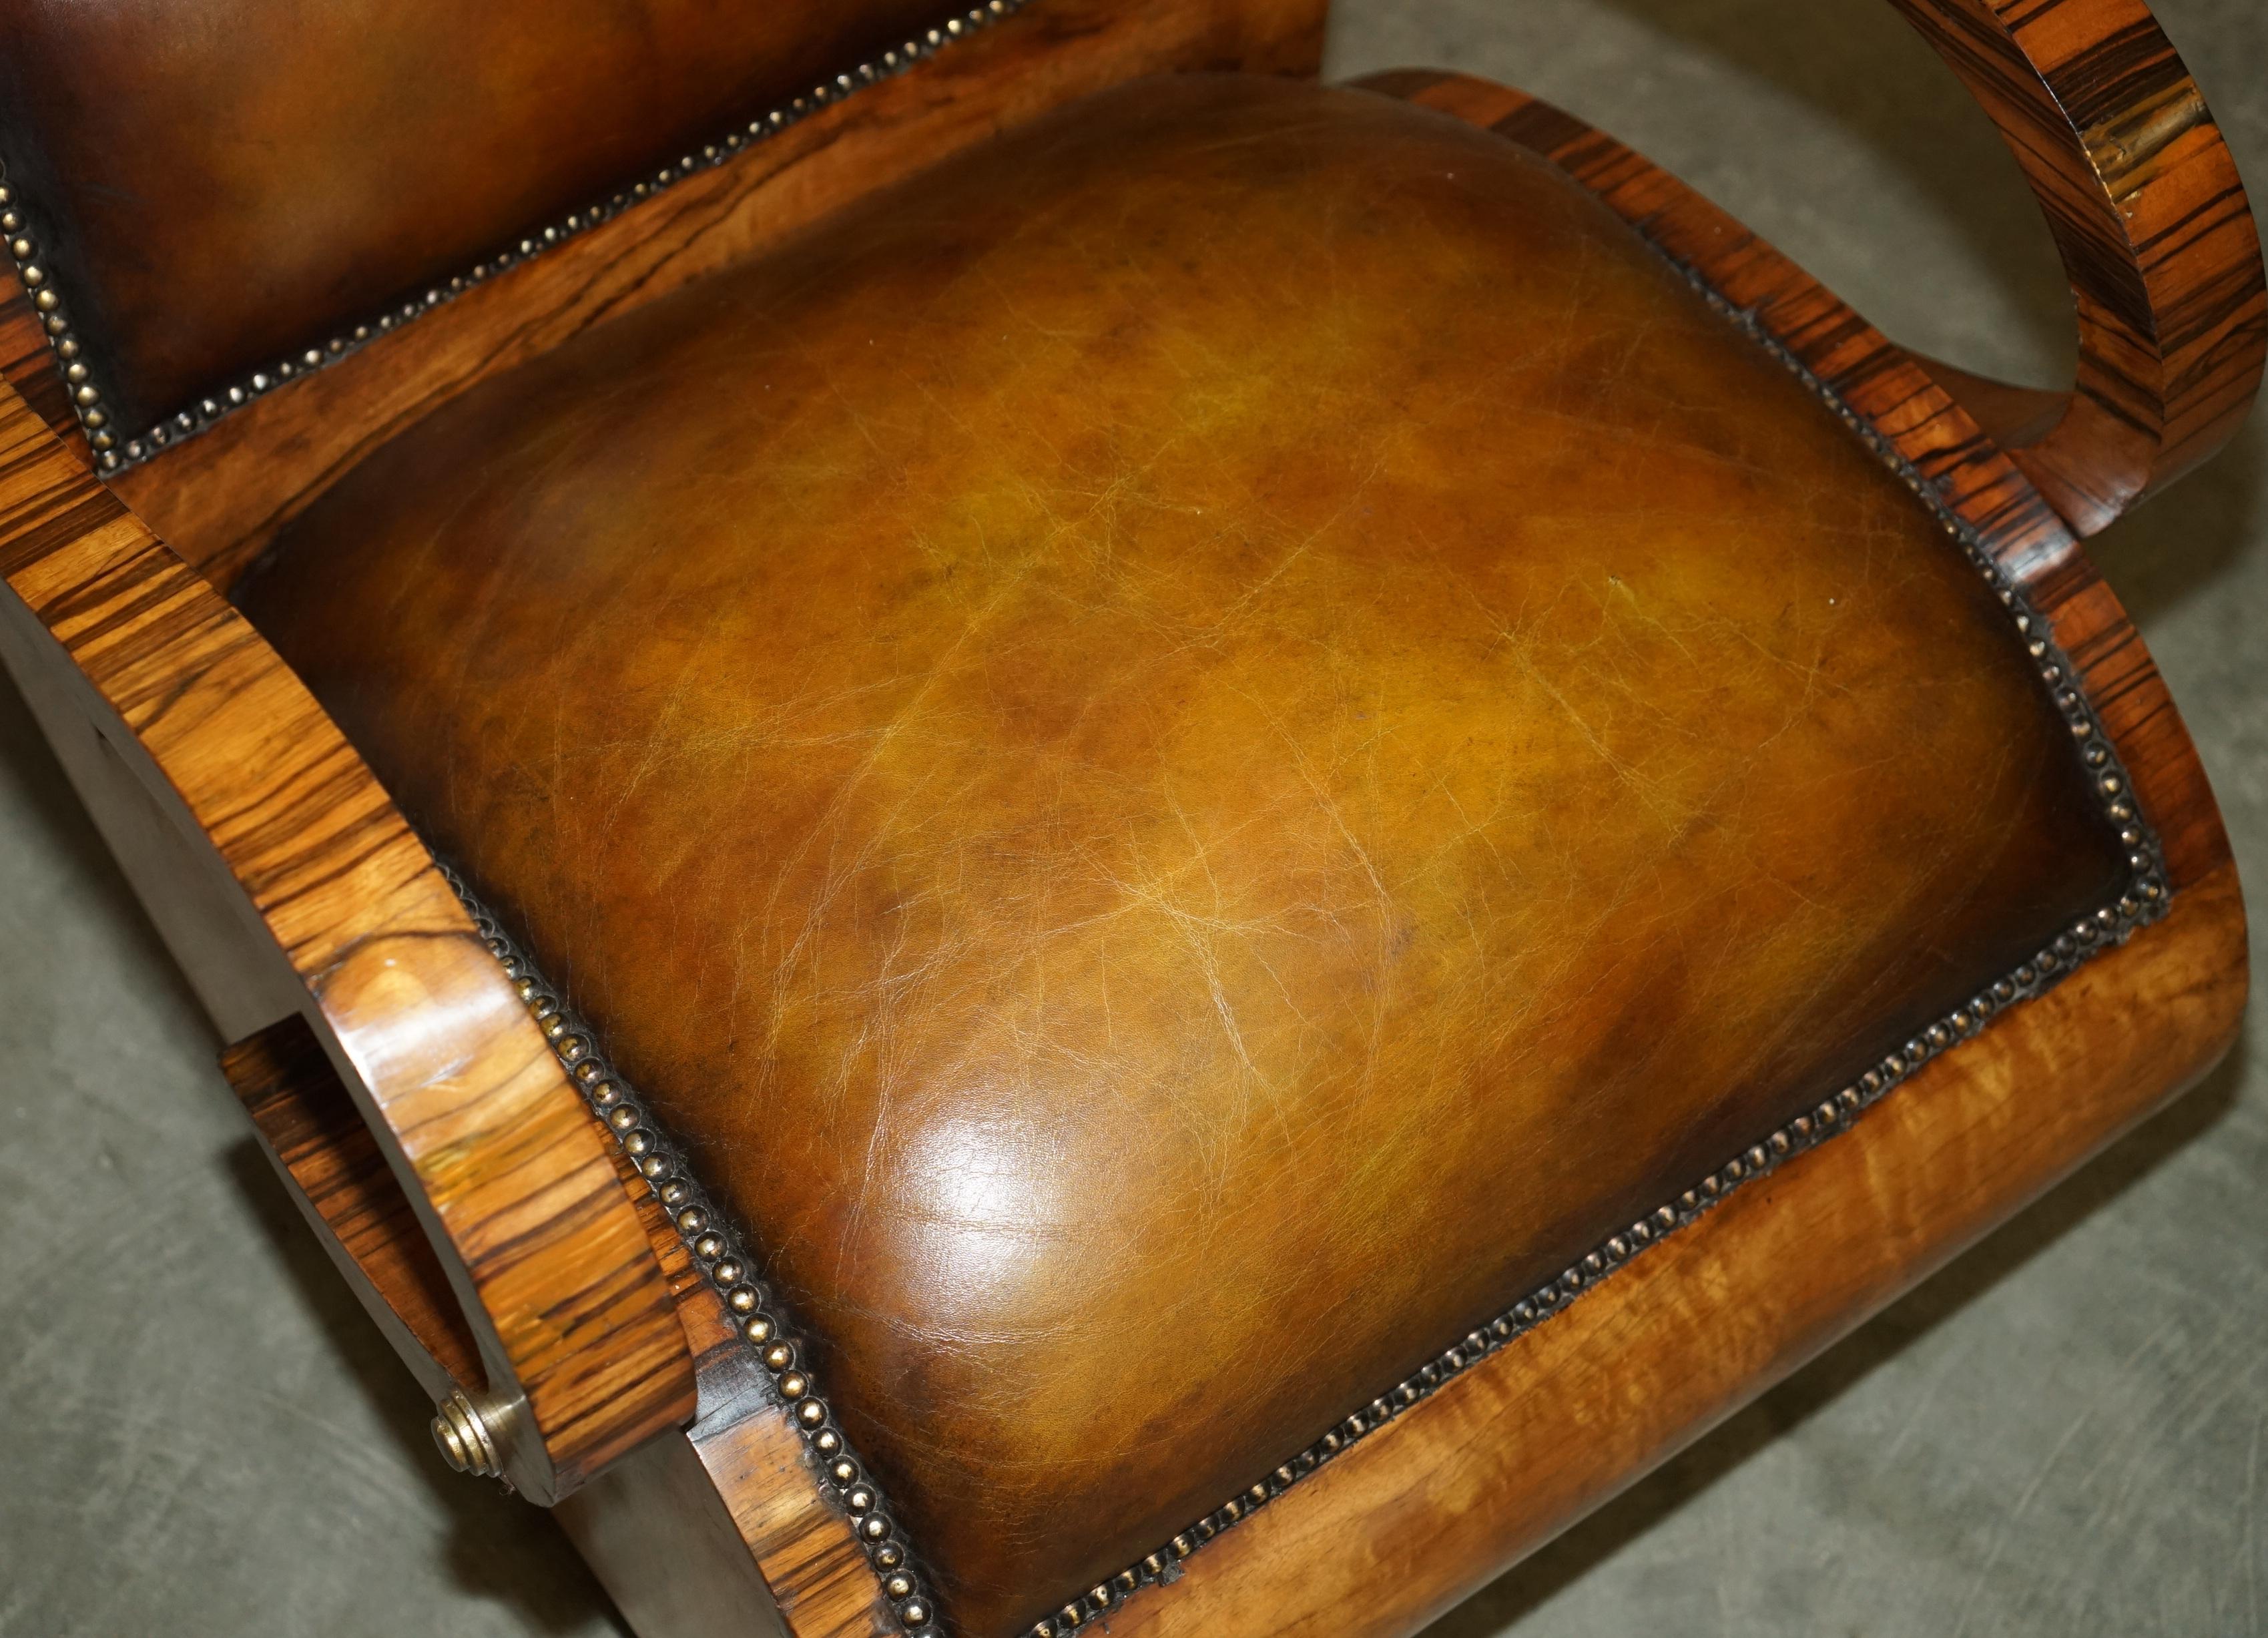 Leather FULLY RESTORED ART DECO CIRCA 1920's ZEBRANO BROWN LEATHER SOFA ARMCHAIR SUITE For Sale